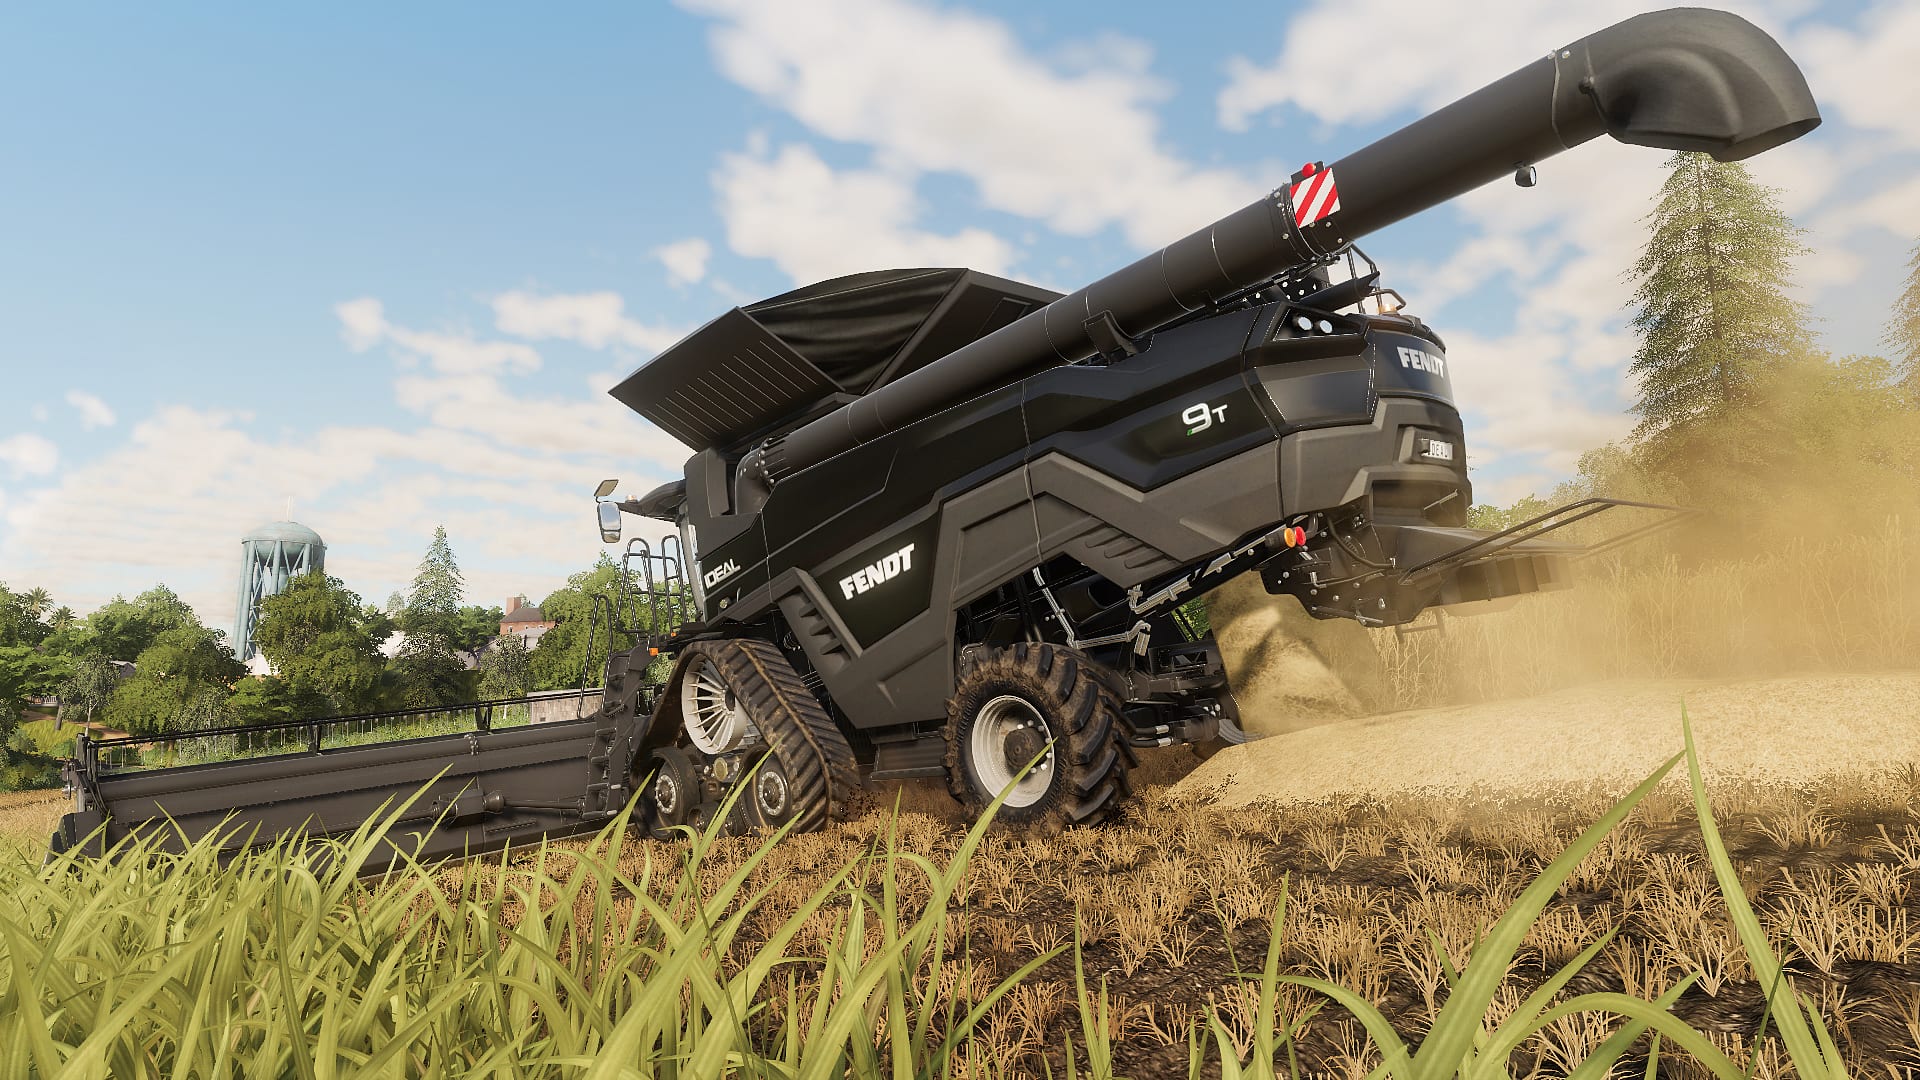 Going with the best thrills with the Farming Simulator 19